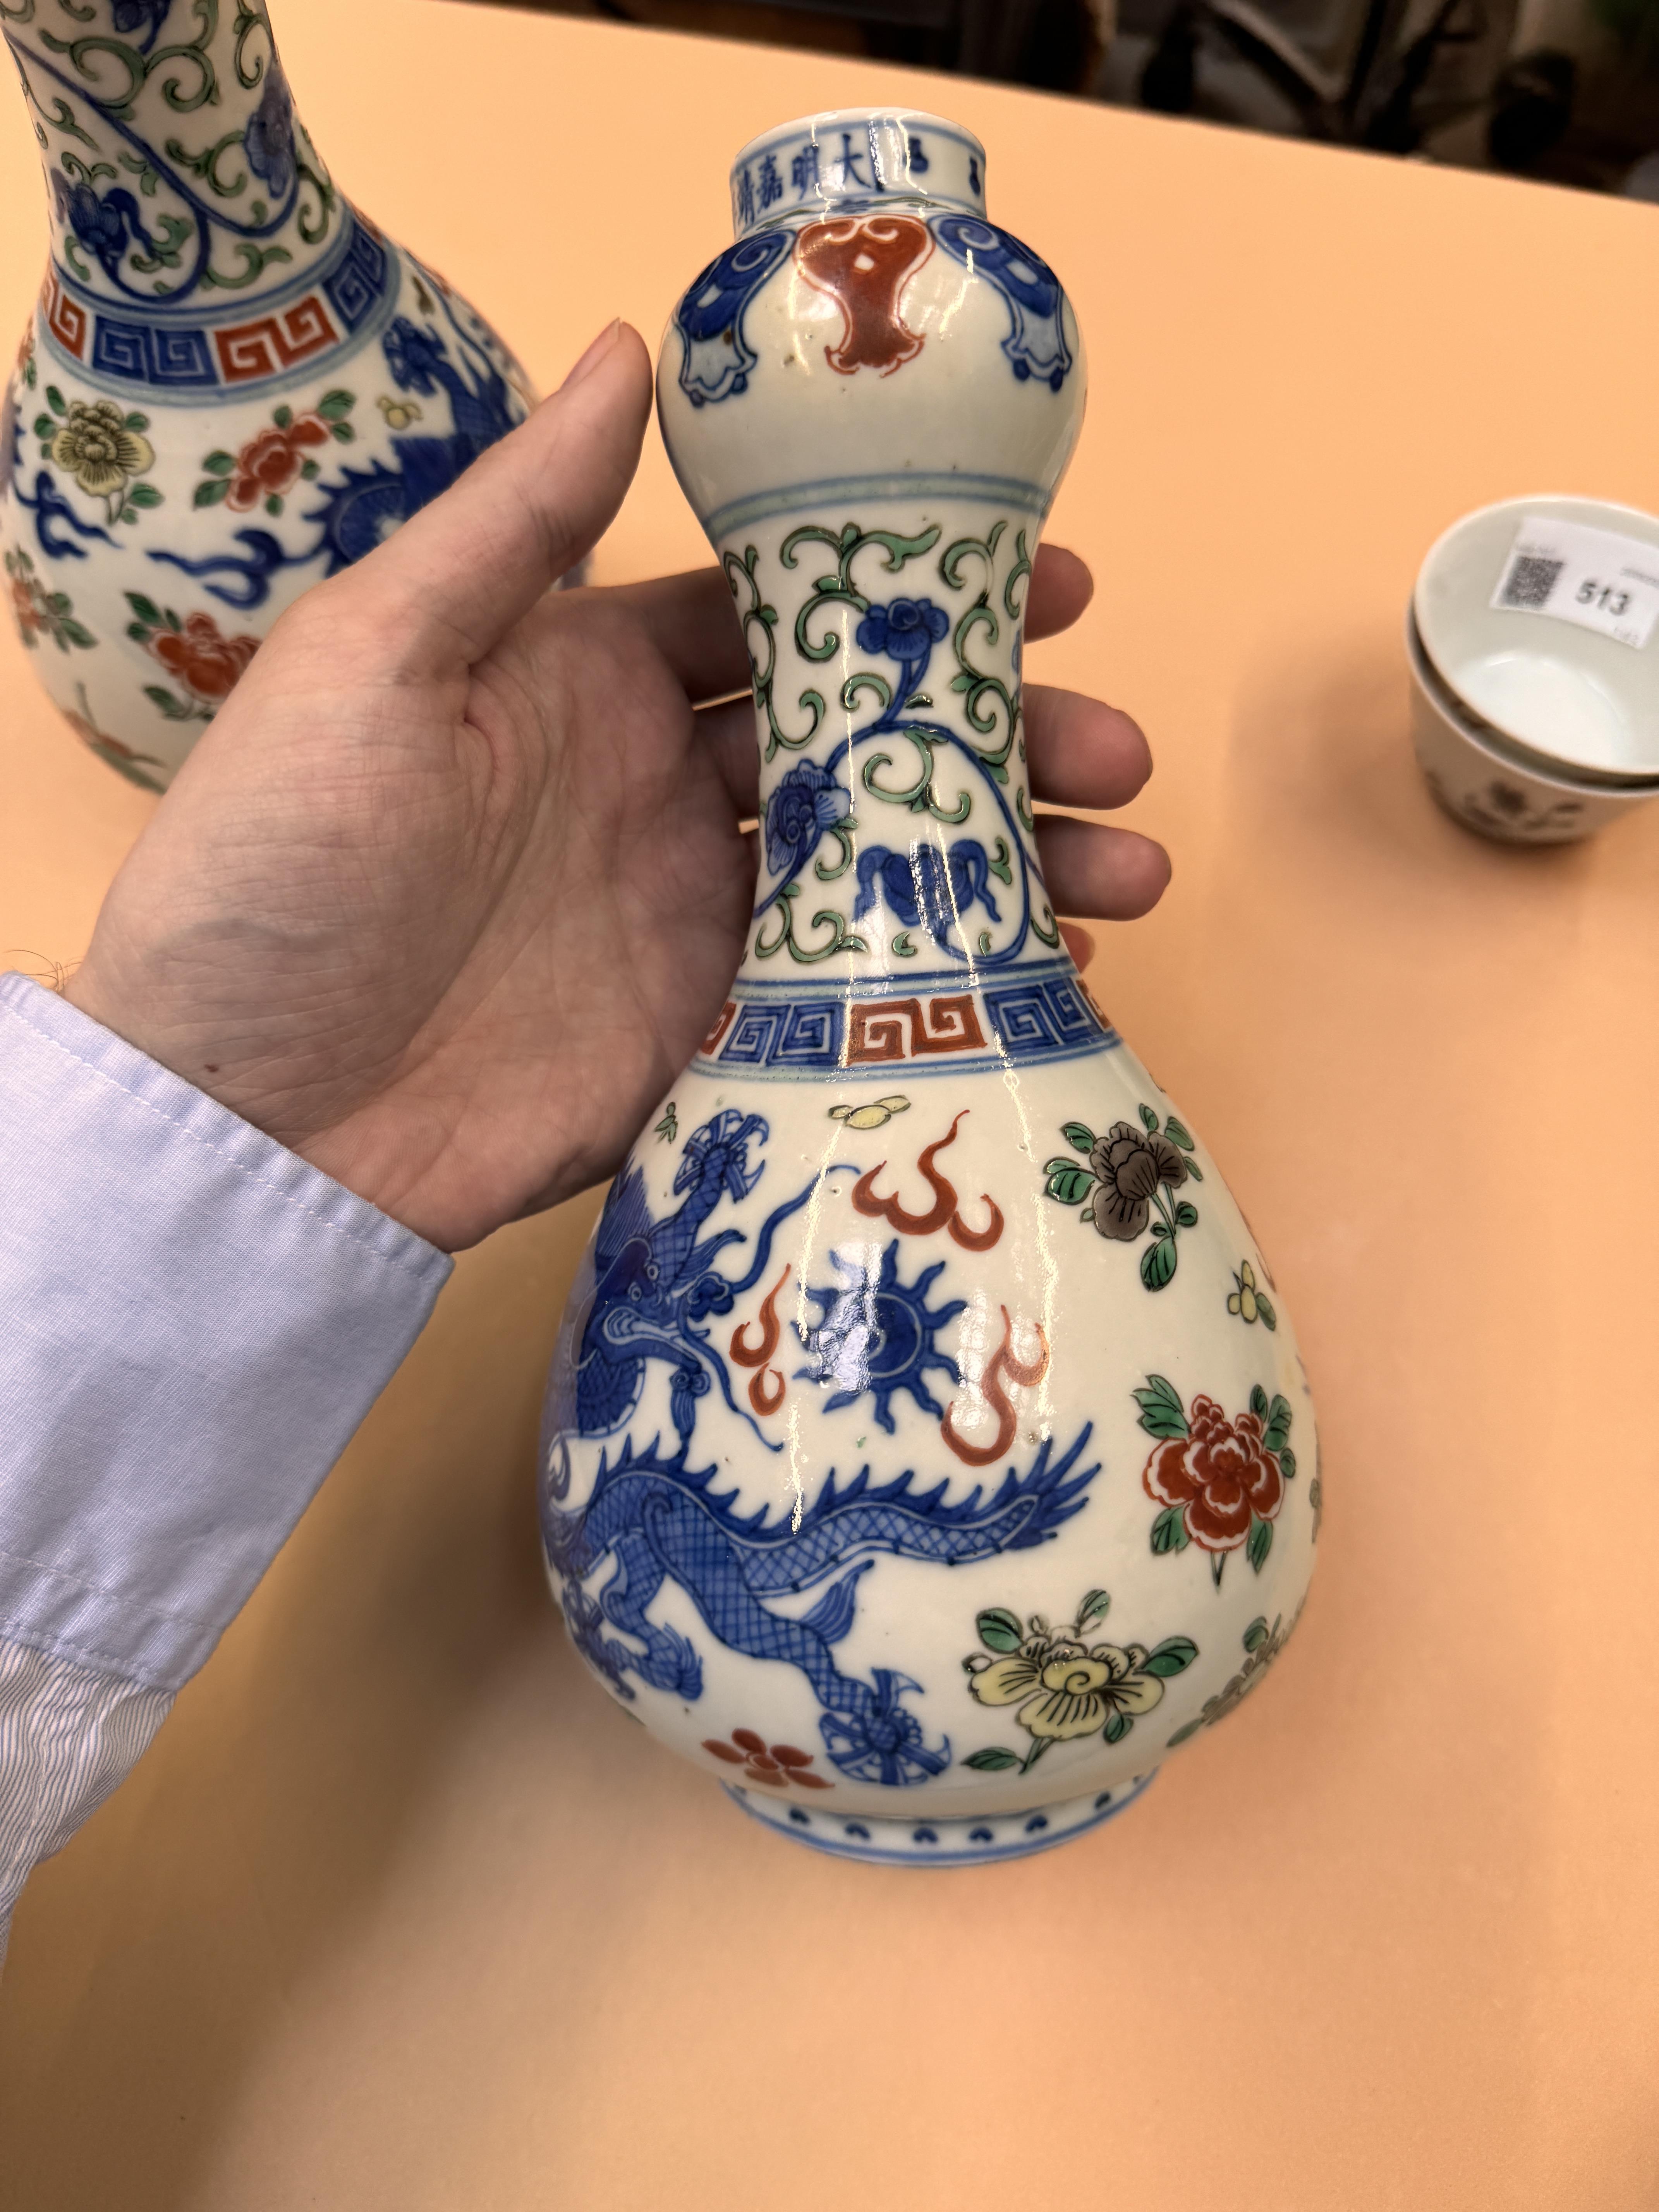 A PAIR OF CHINESE WUCAI 'DRAGON' VASES 民國時期 五彩龍趕珠紋瓶一對 《大明嘉靖年製》款 - Image 11 of 19